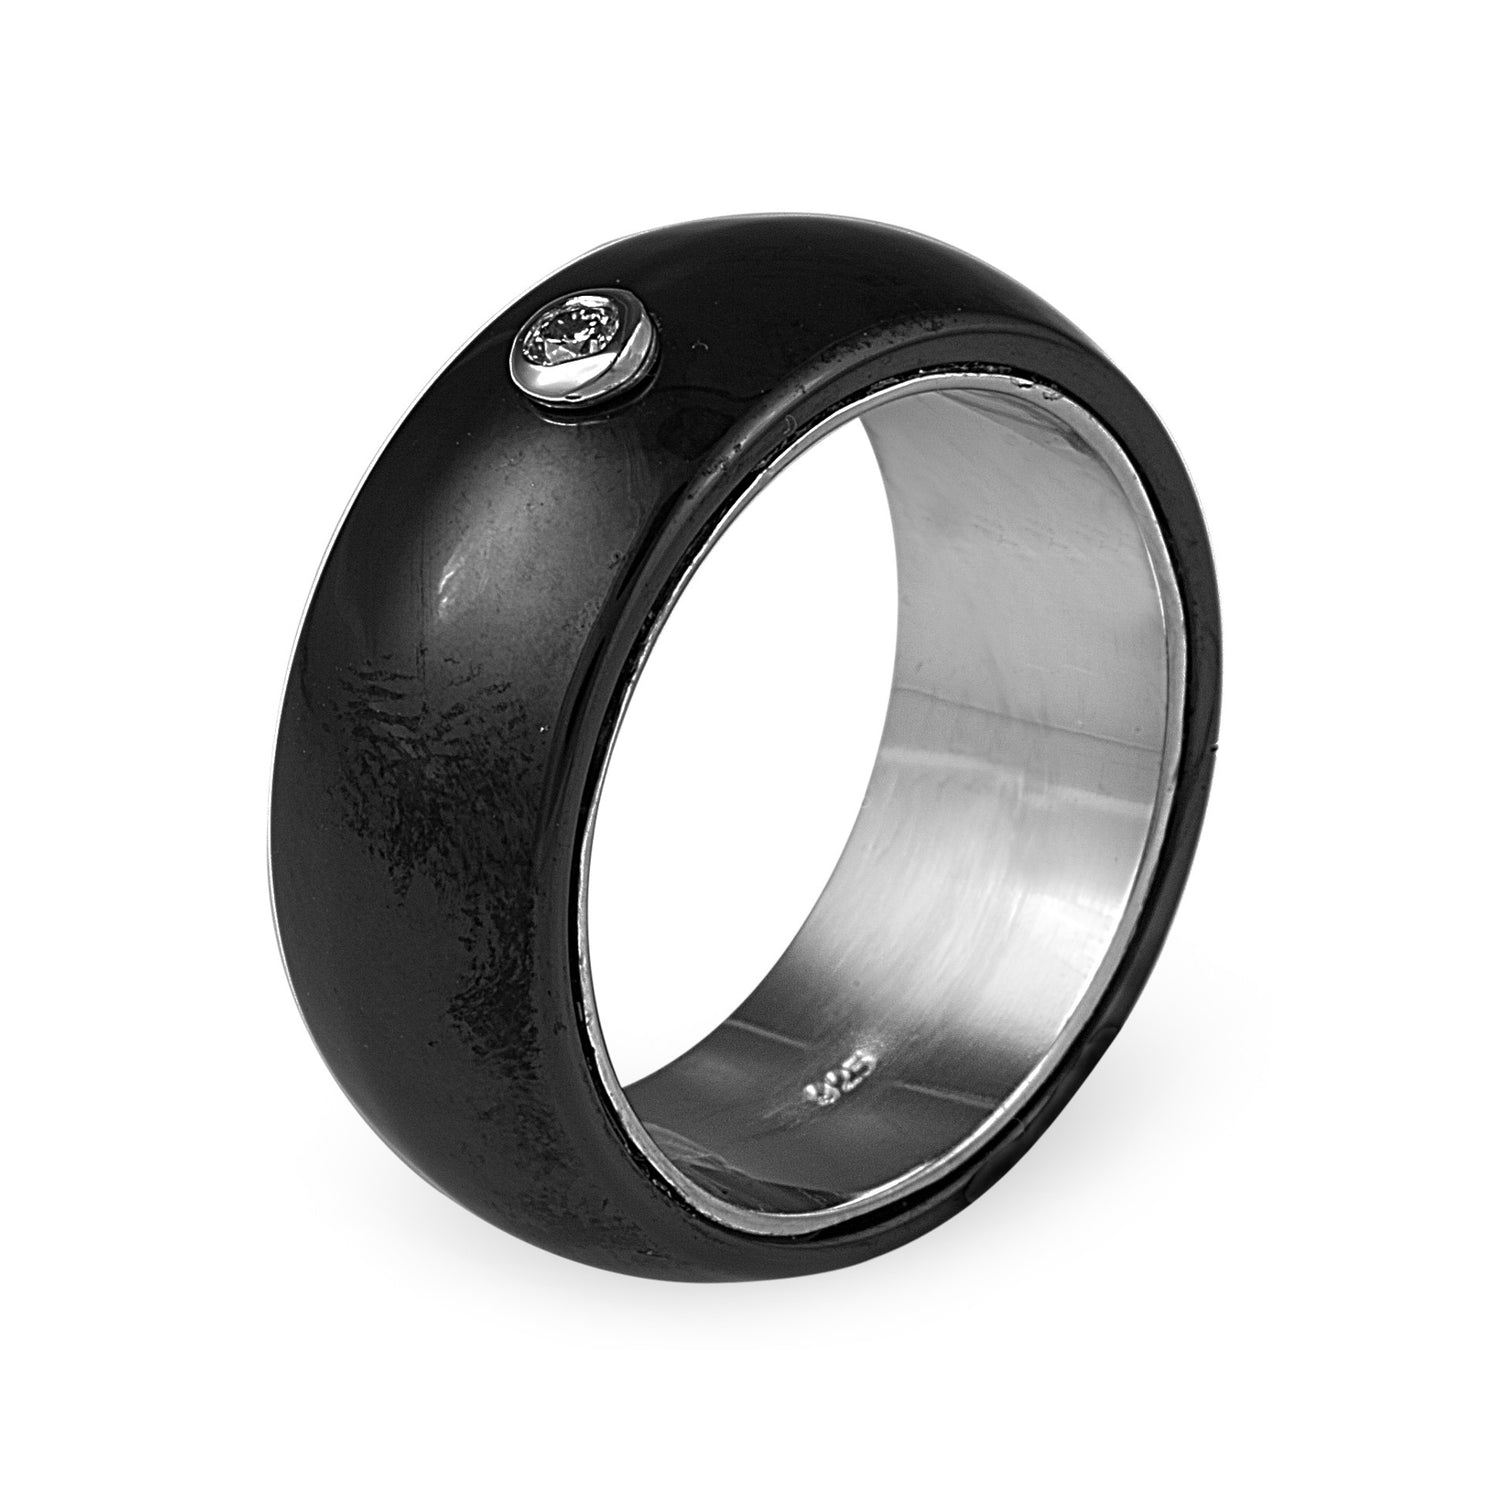 Midnight Roc Ring with real diamond and high polished black ceramic overlayed on 925 Sterling Silver. Shop rings & affordable luxury jewellery by Bellagio & Co. Worldwide shipping.